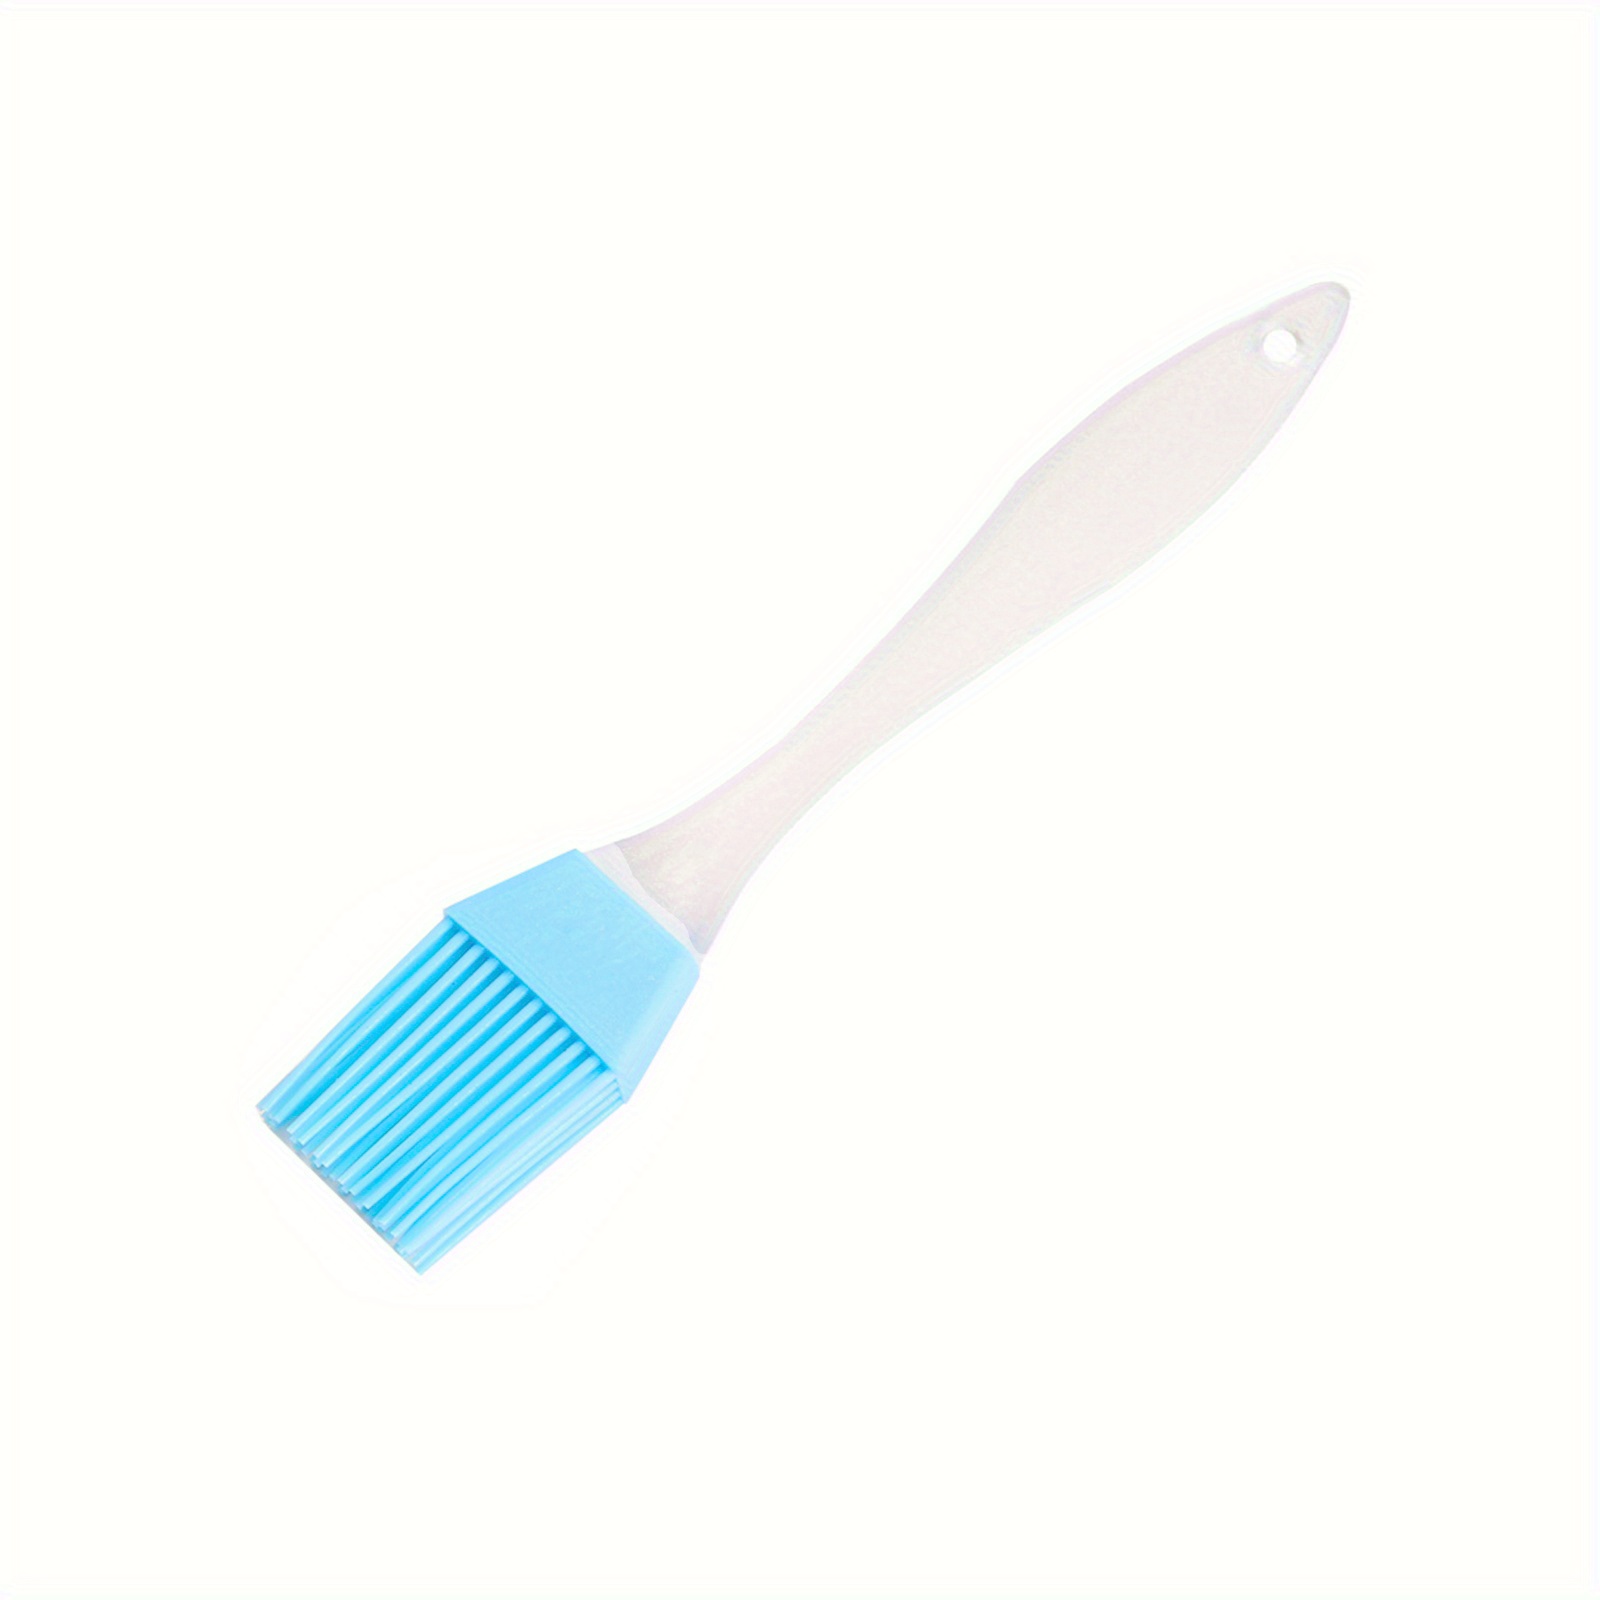  Silicone Basting Pastry Brush - Cooking Brush for Oil Sauce  Butter Marinades, Food Brushes for BBQ Grill Kitchen Baking, Baster Brushes  Baste Pastries Cakes Meat Desserts, Food Grade, Dishwasher Safe: Home